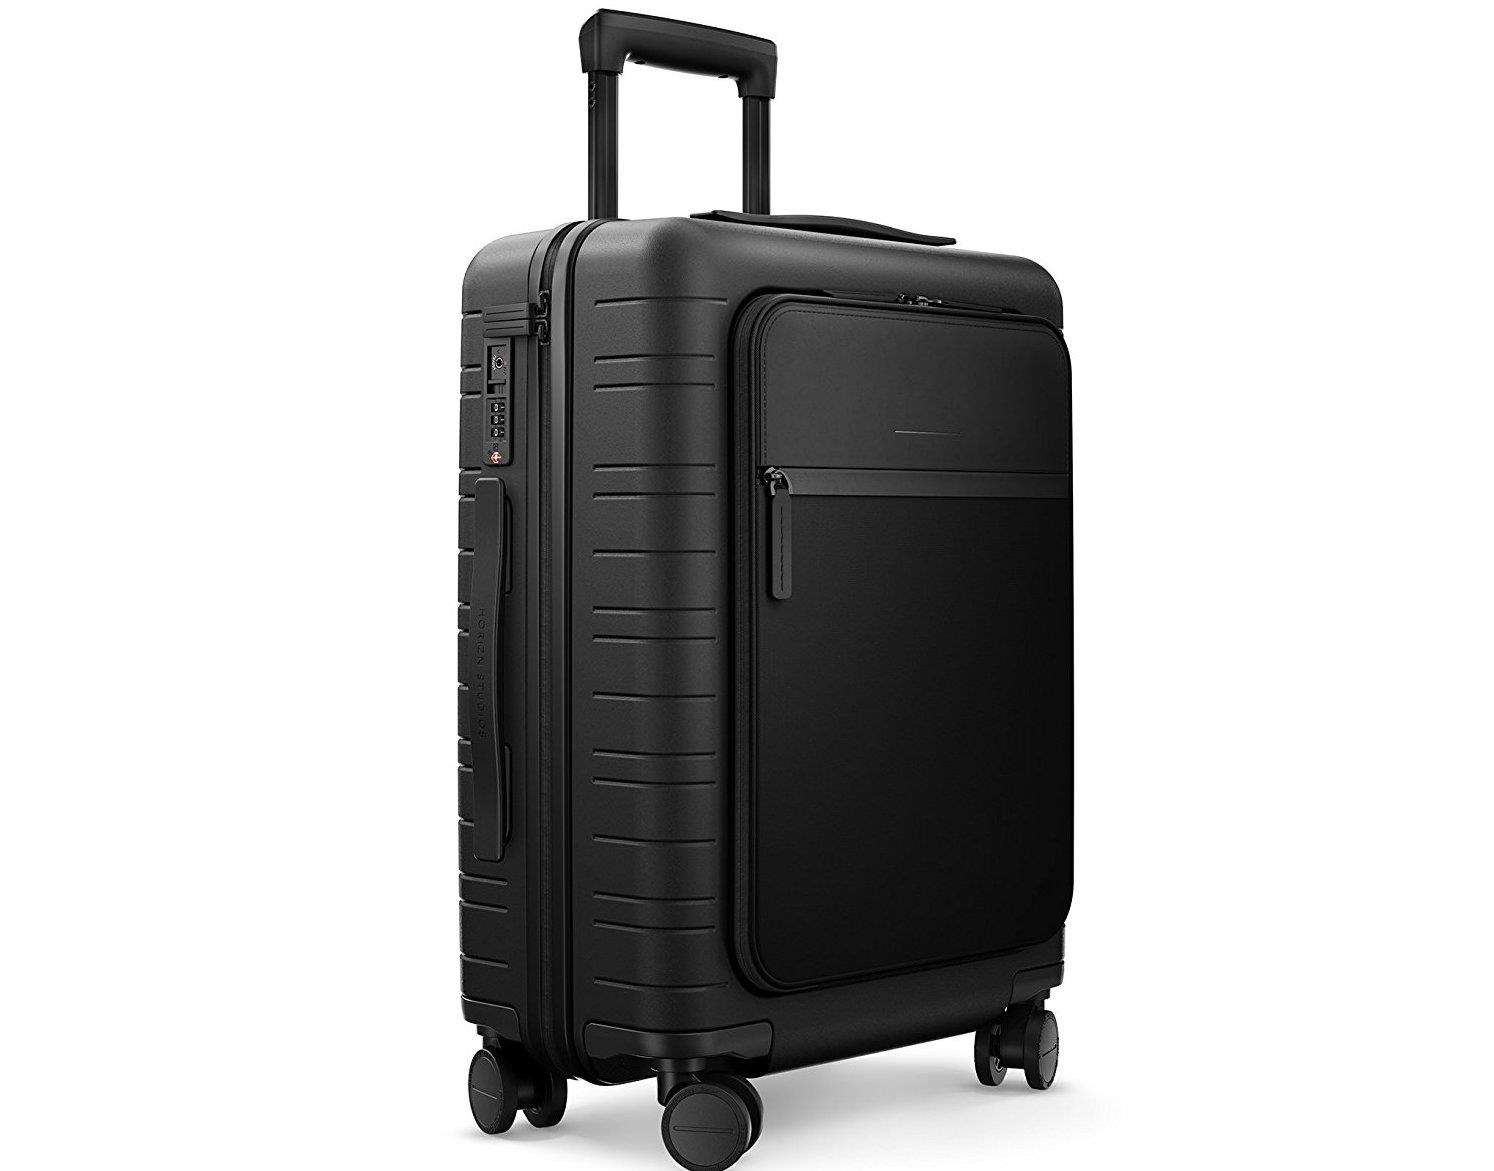 Horizn Studios Luggage are on sale at 30% off